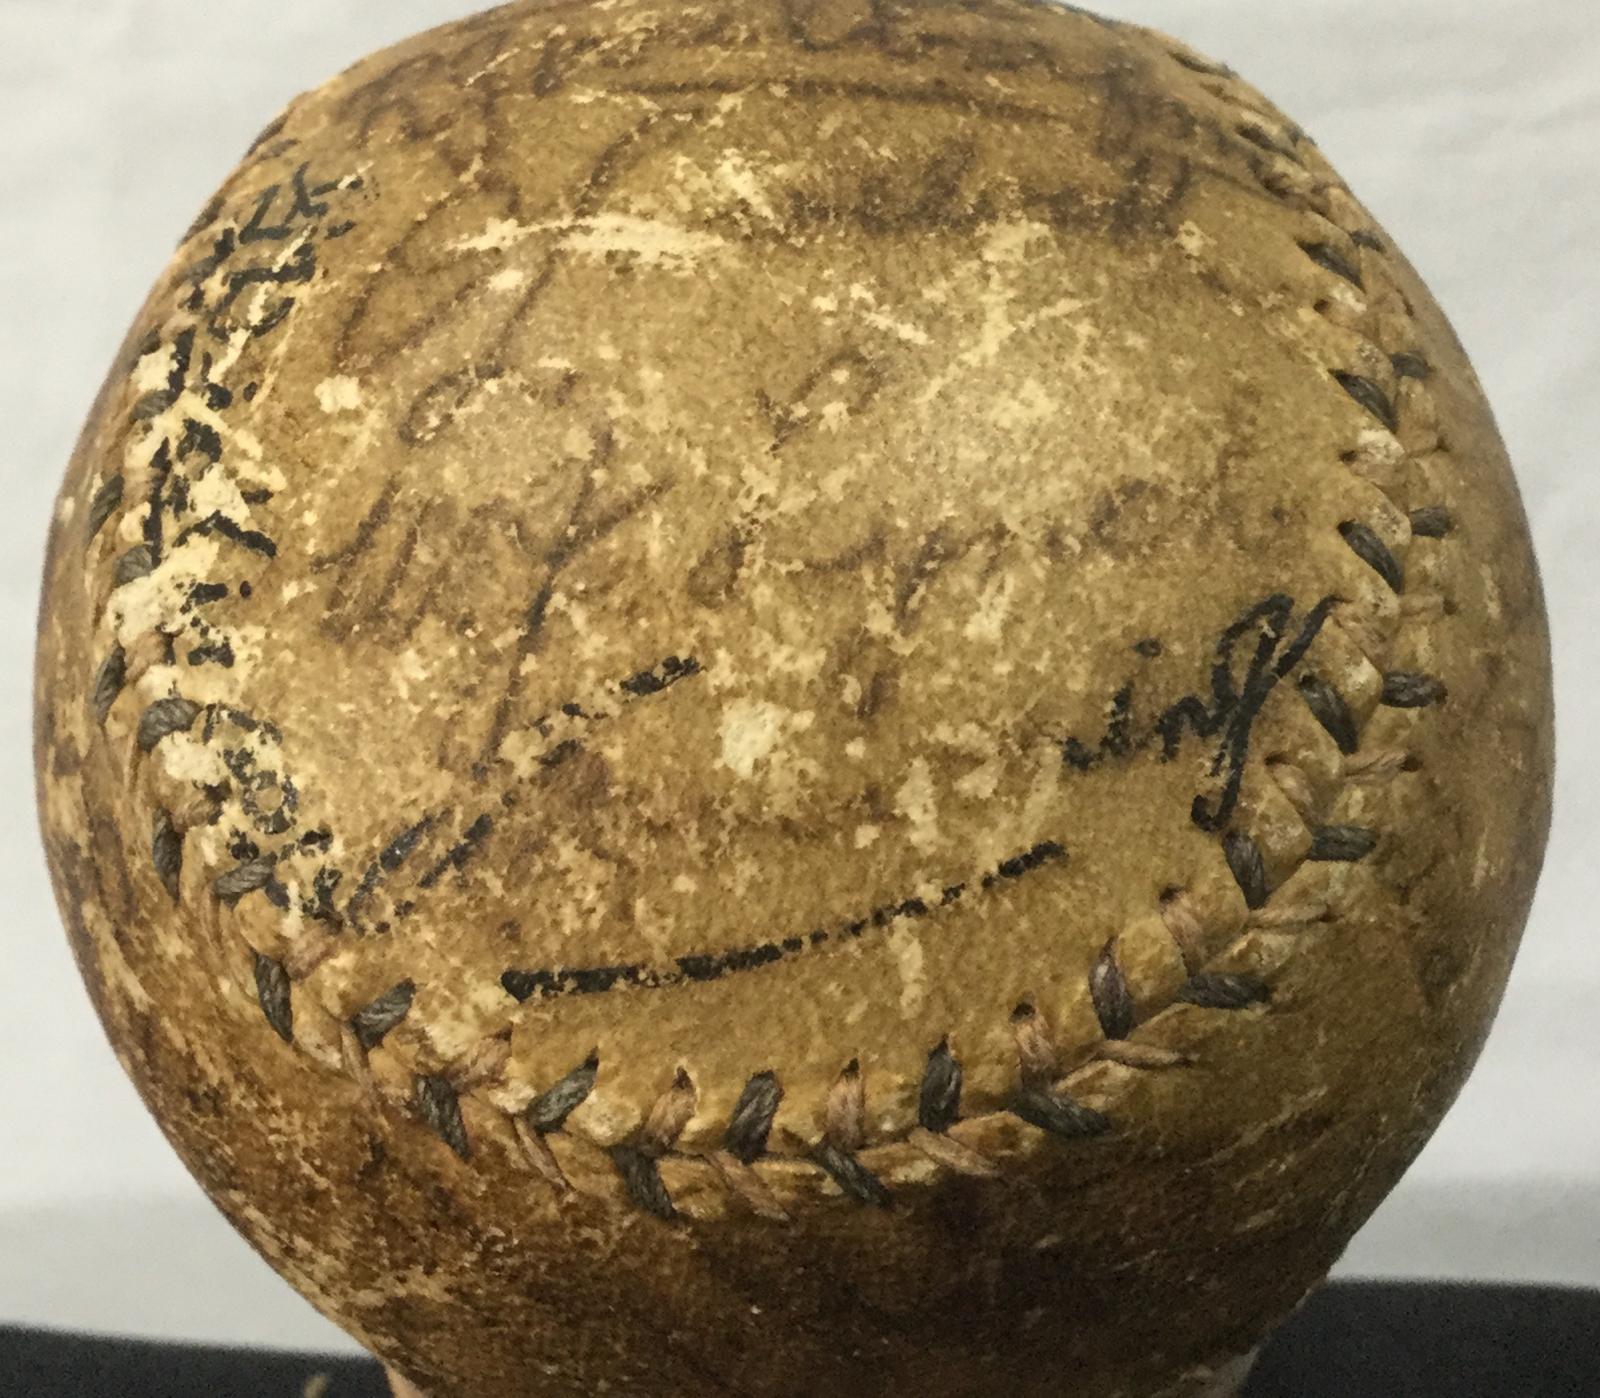 1936 signed baseball from the first games between Western Australia and Victoria